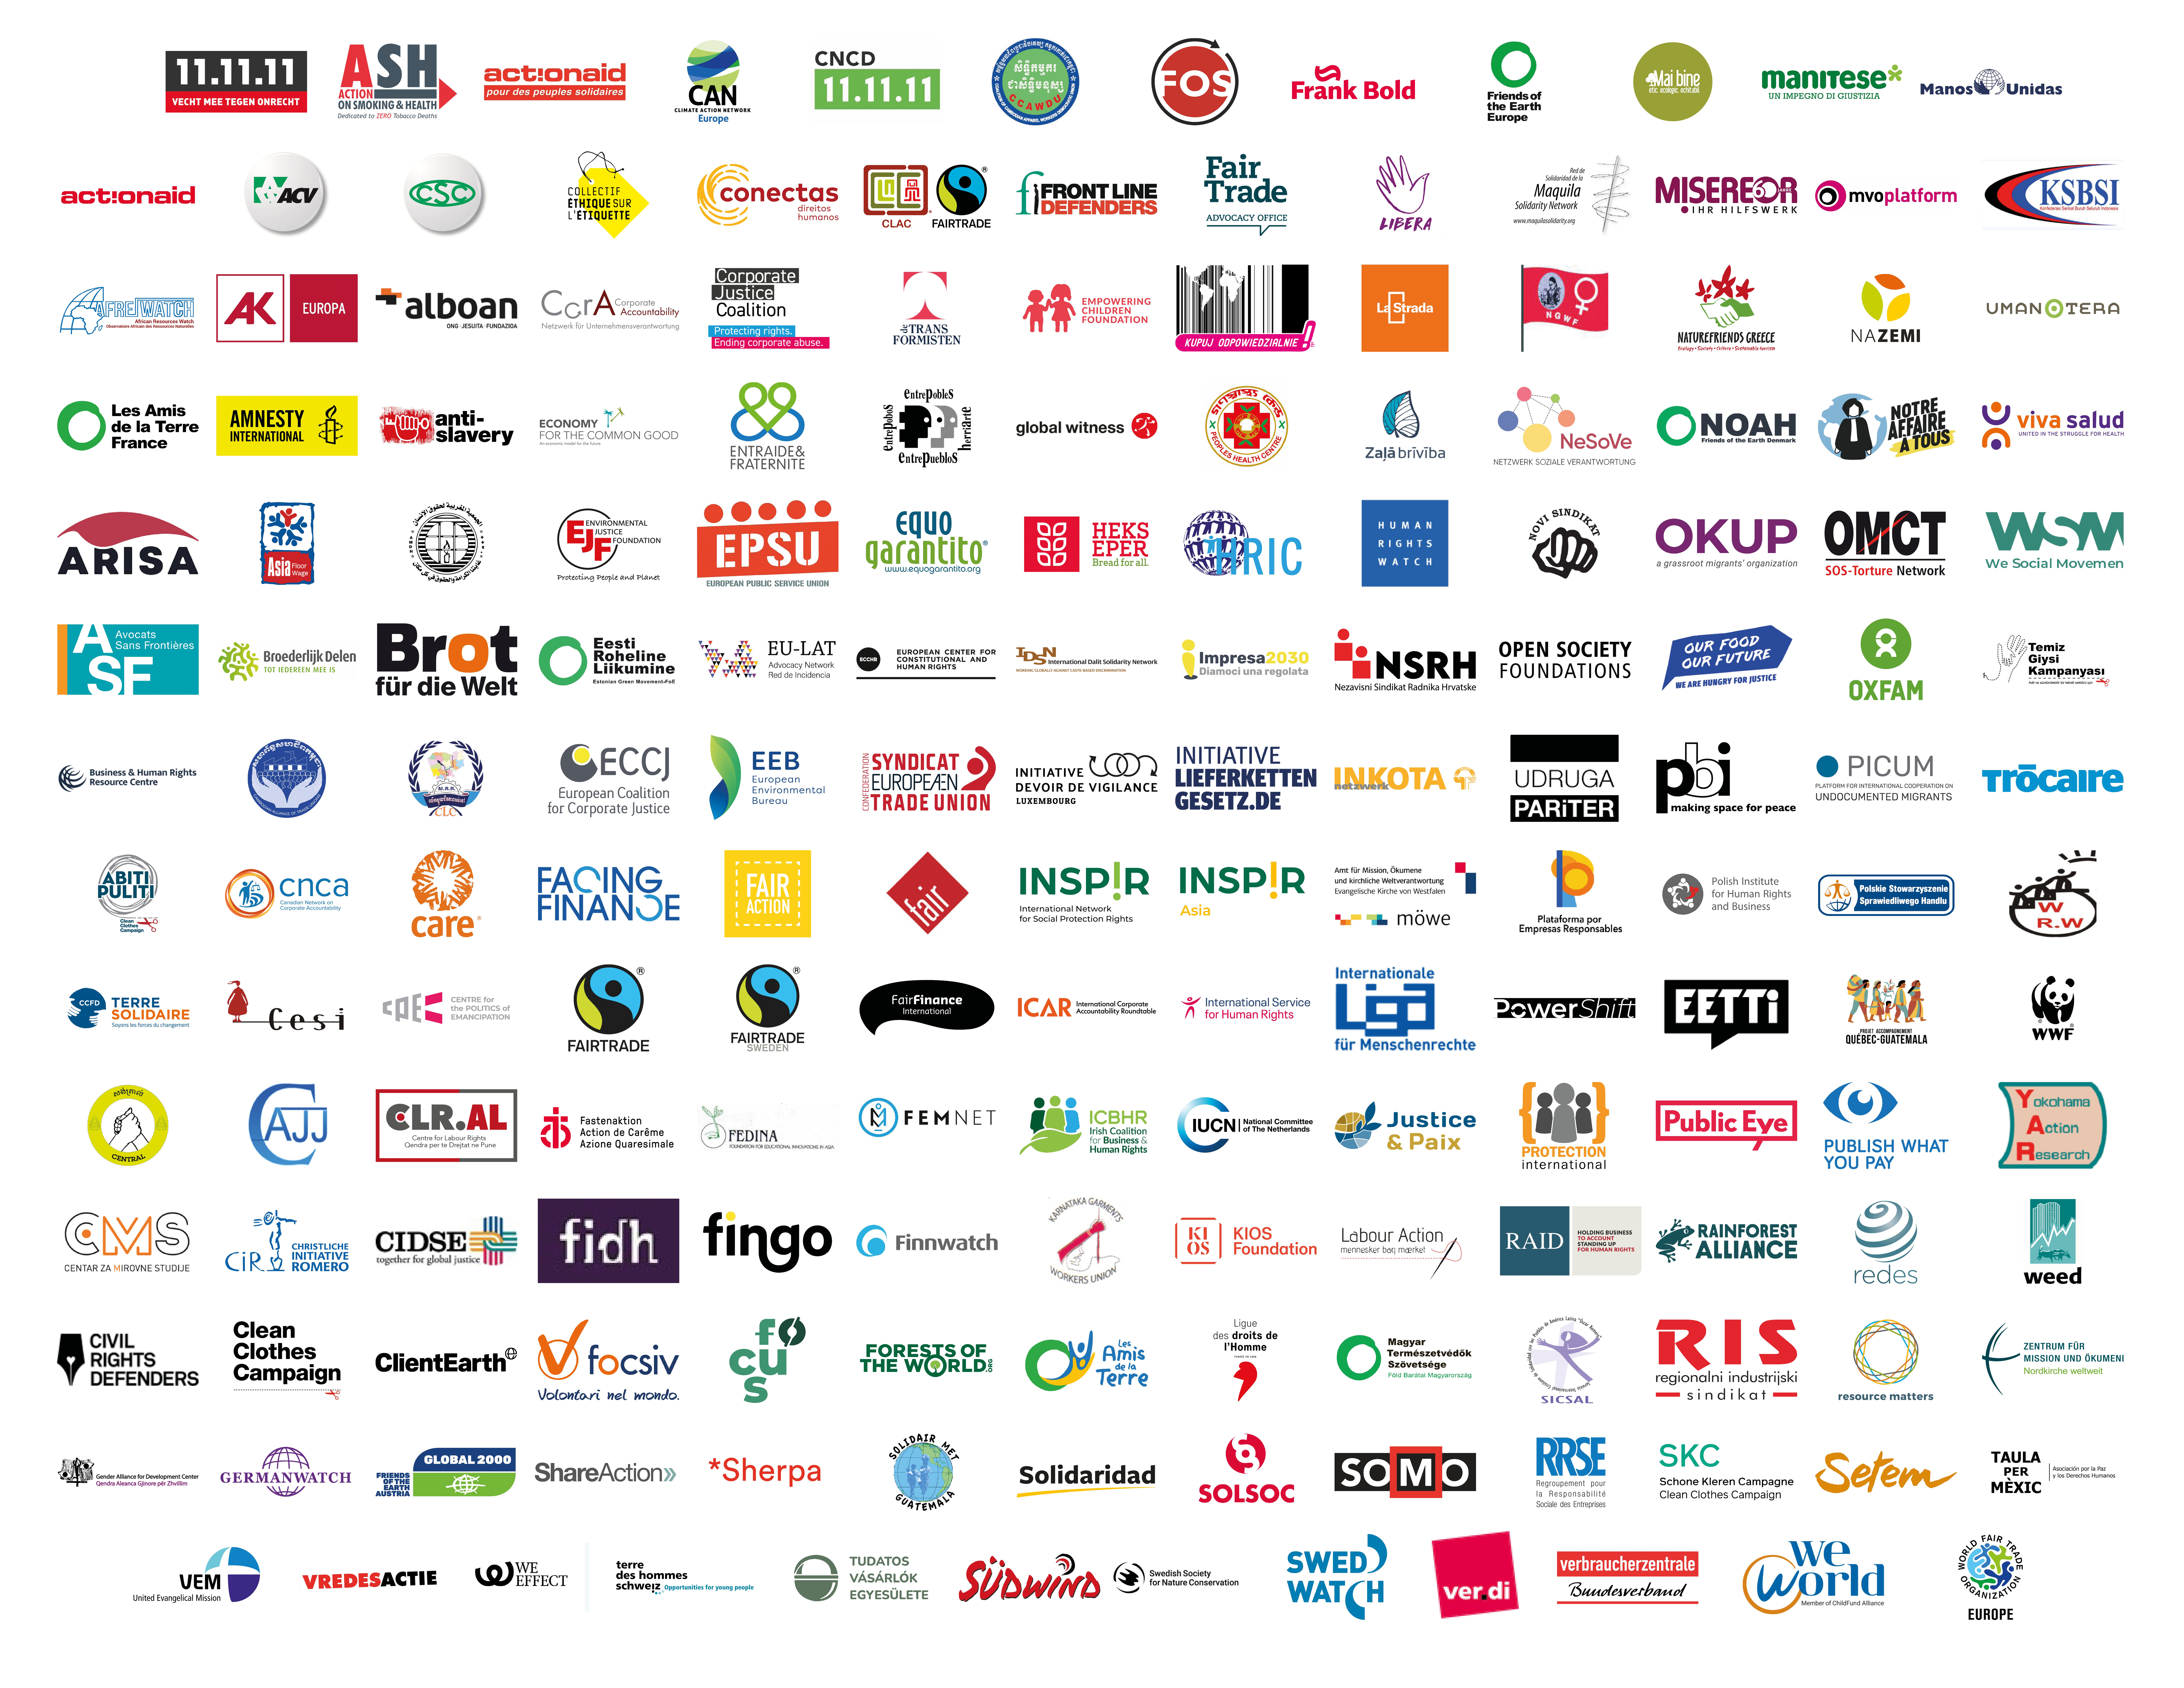 Over 220 civil society groups call for EU corporate sustainability law to be strengthened